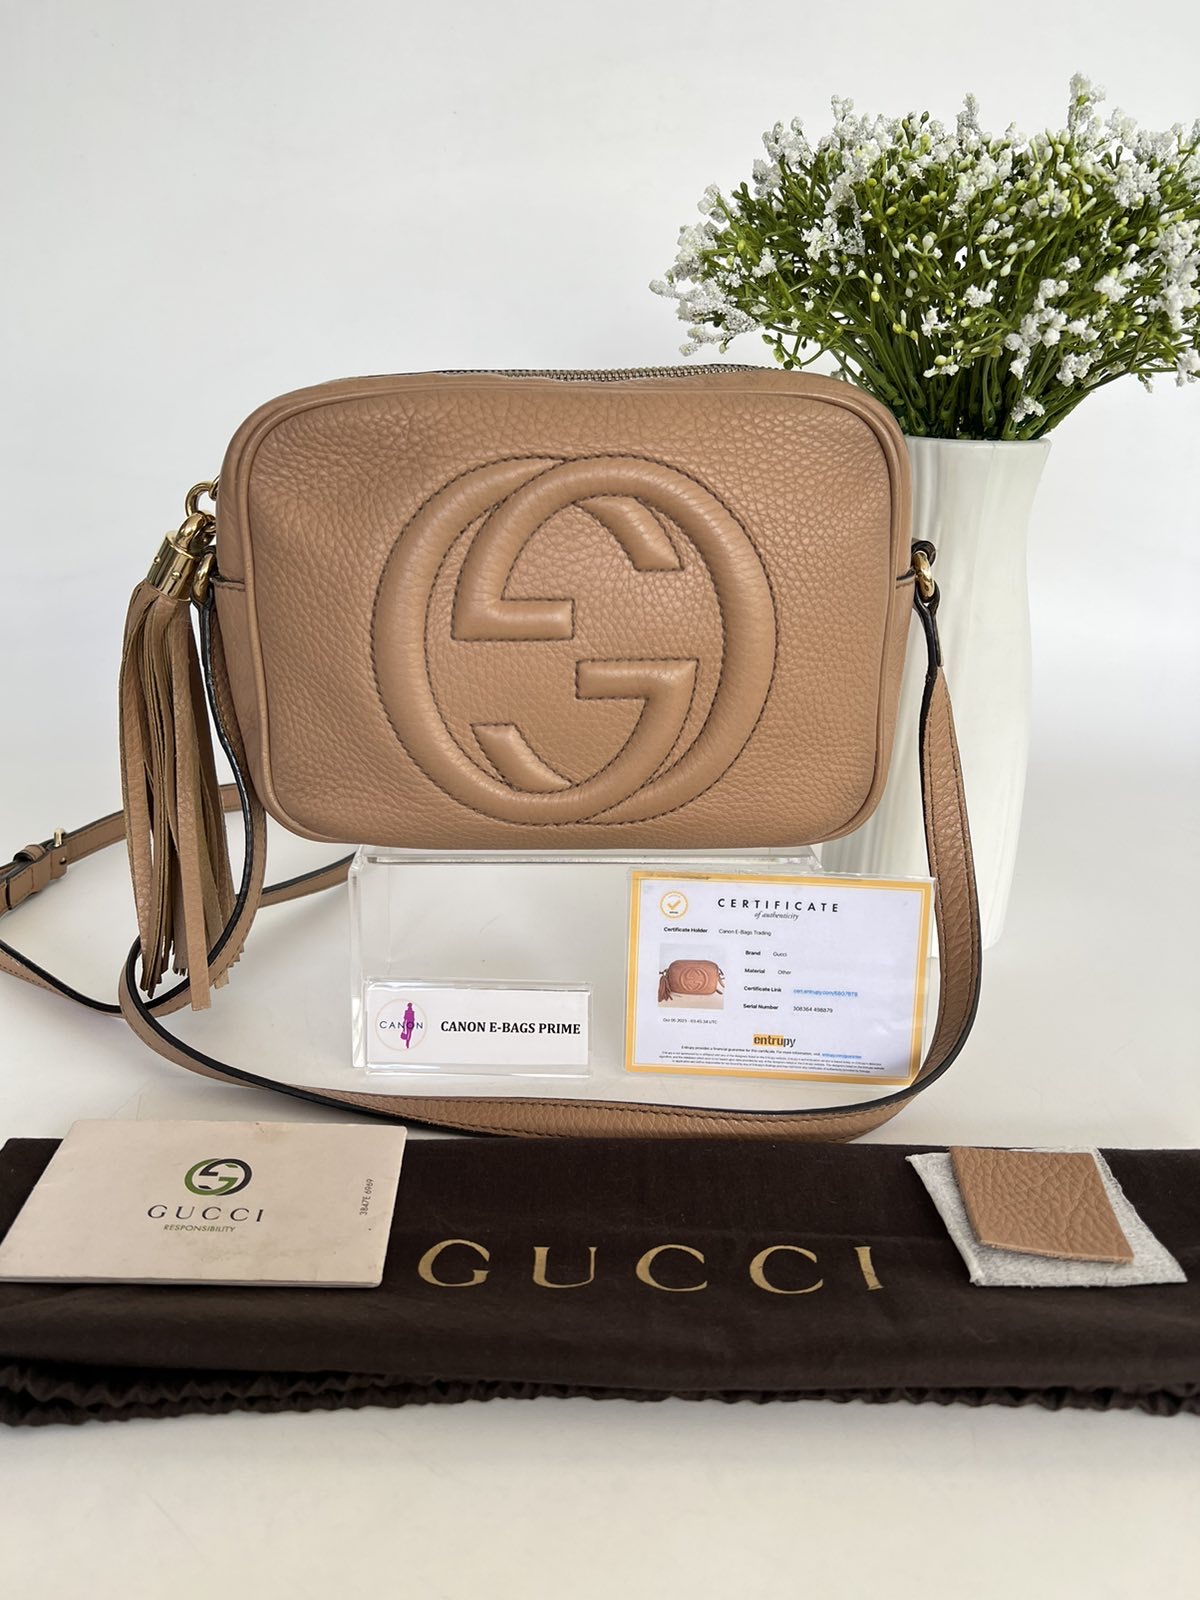 Gucci Beige Soho Crossbody Bag Gold Hardware. Made in Italy. With care  card, leather swatch, dustbag & certificate of authenticity from ENTRUPY ❤️